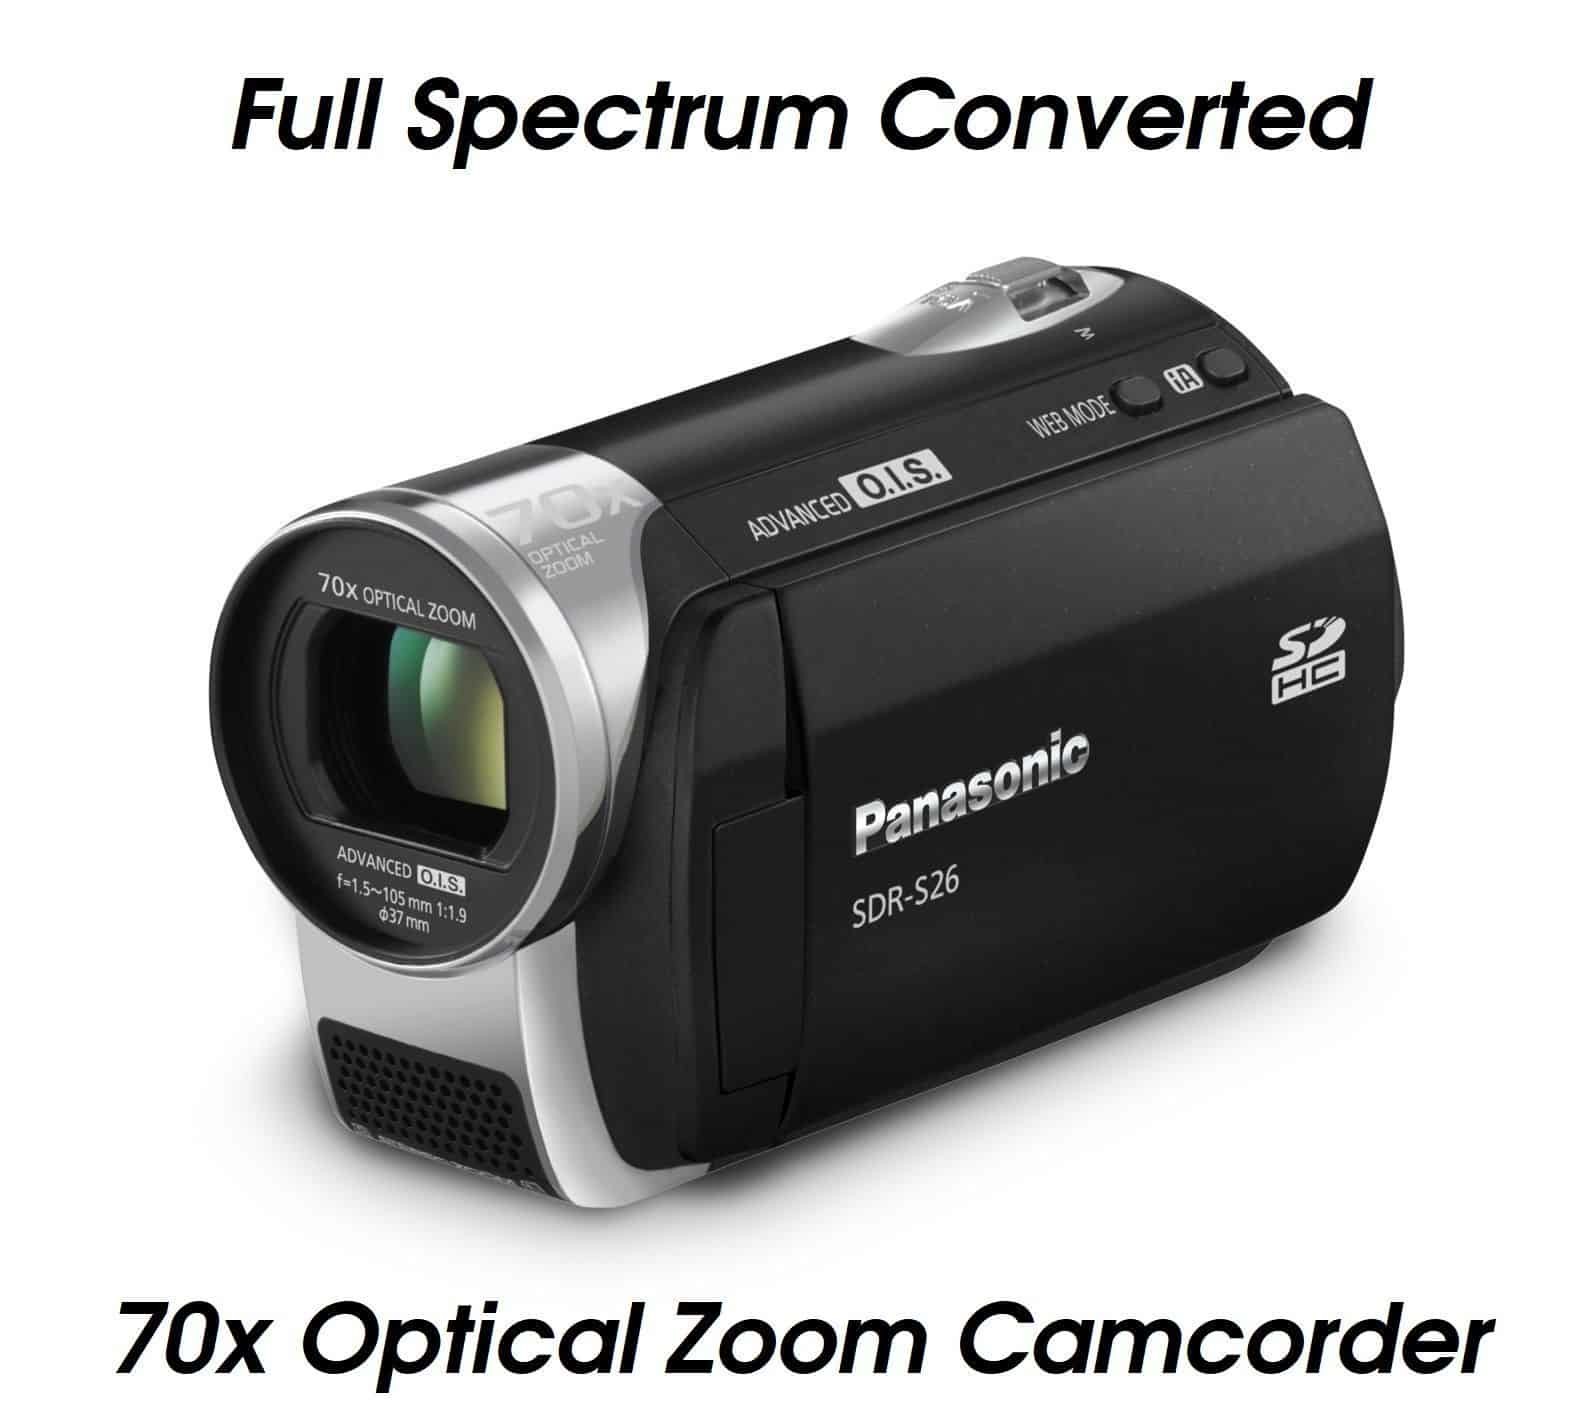 Full Spectrum Night Vision Capable Camcorders for recording in complete darkness. Ideal for 